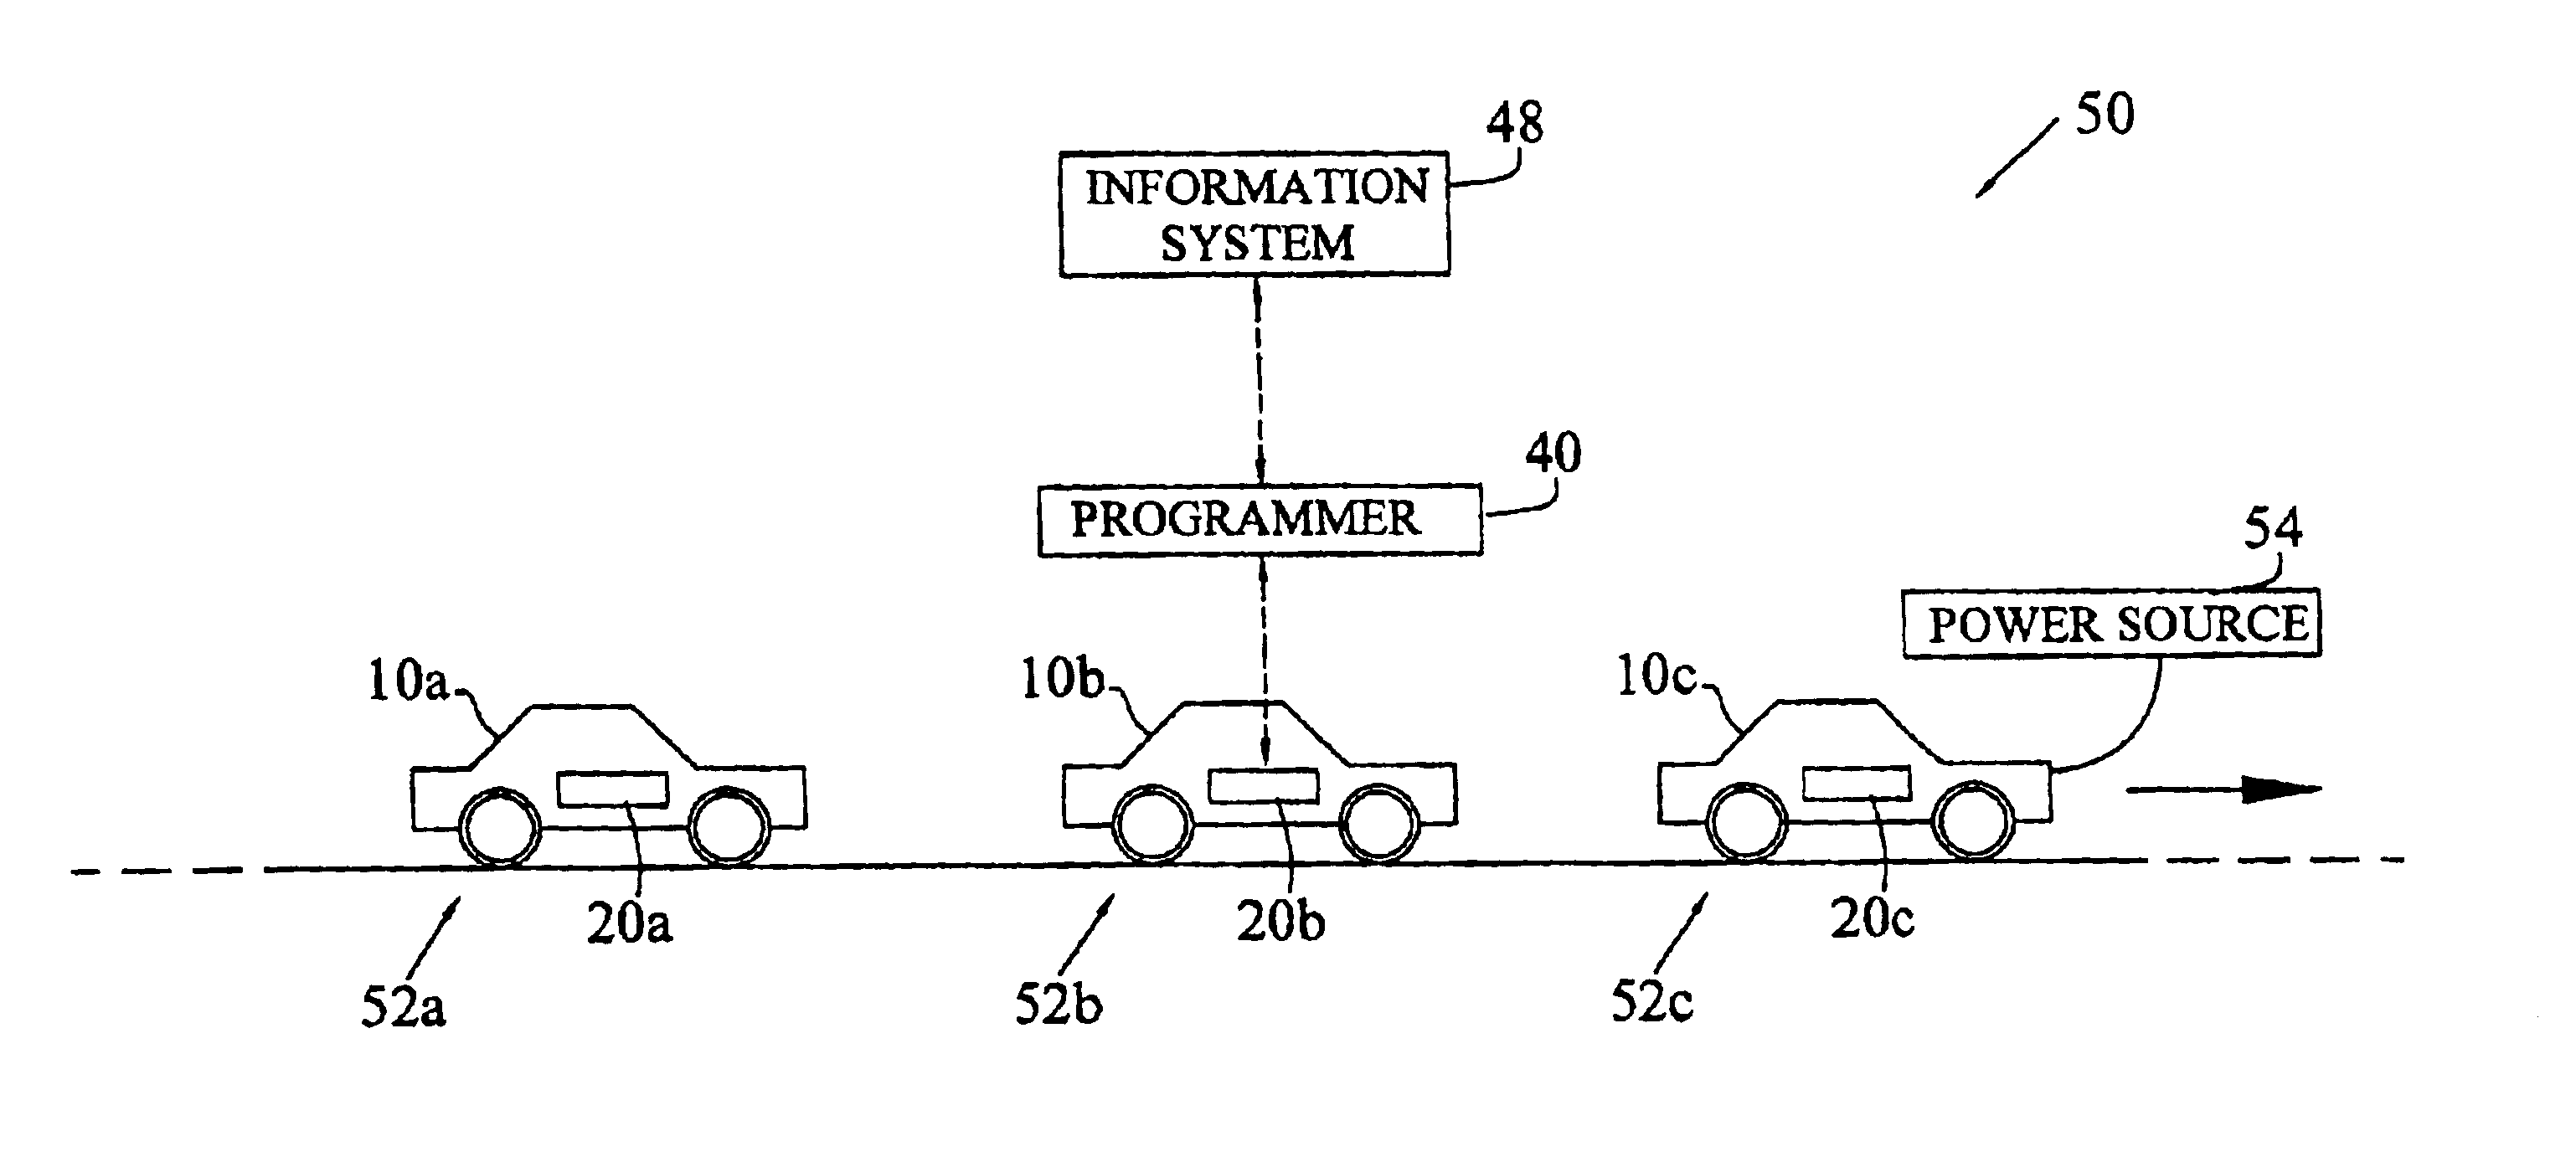 Method to provide off-line transfer of vehicle calibration data